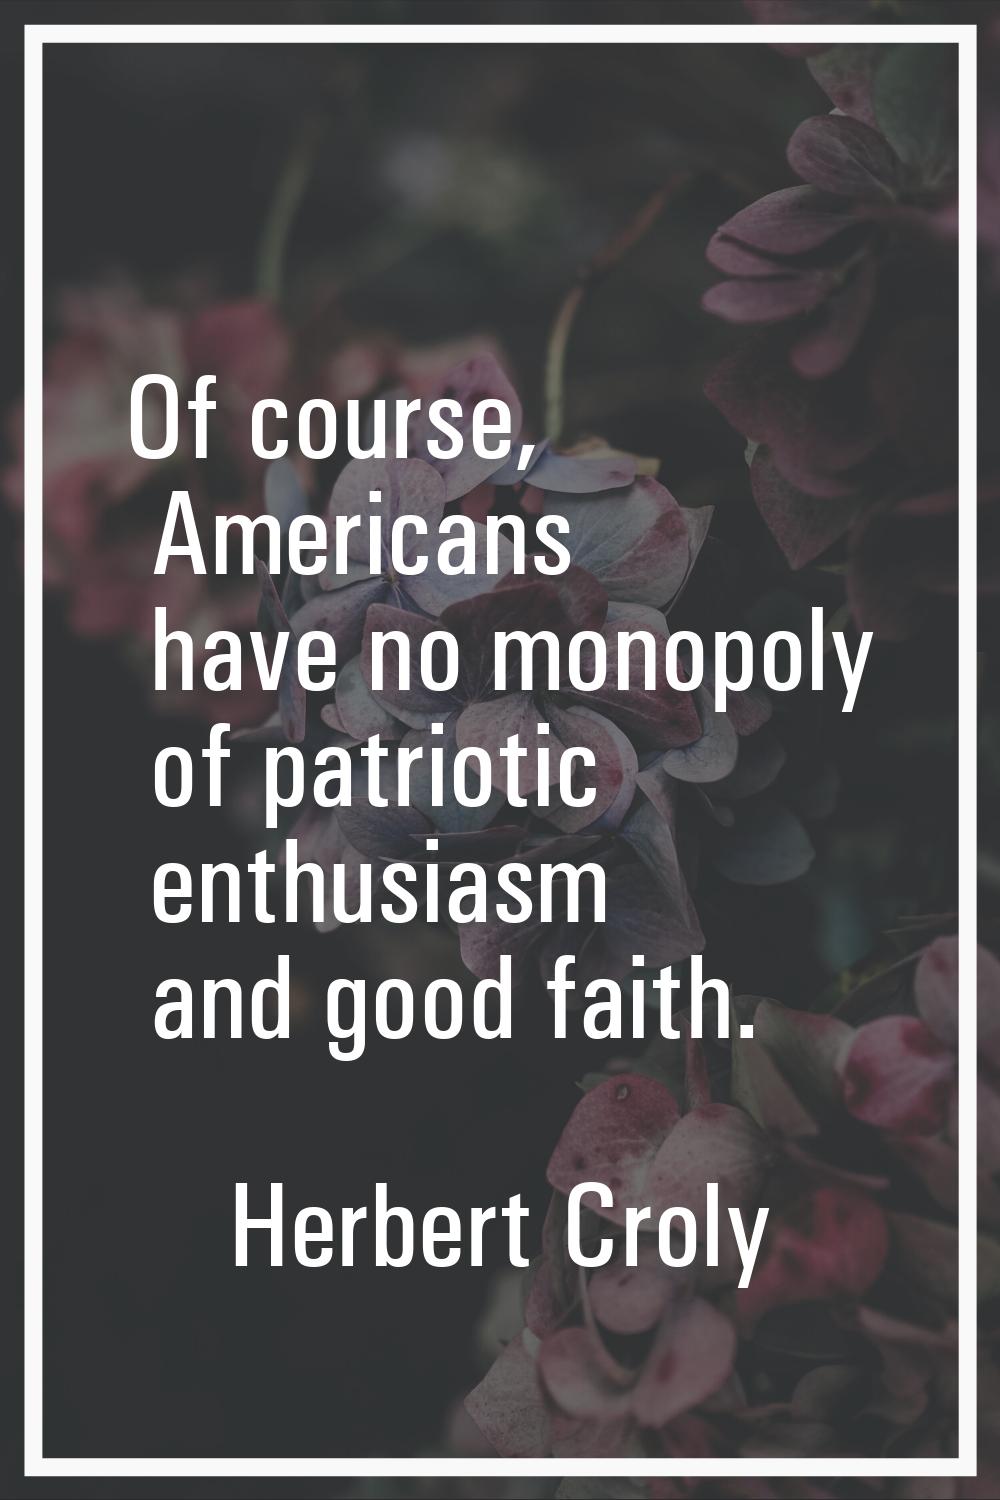 Of course, Americans have no monopoly of patriotic enthusiasm and good faith.